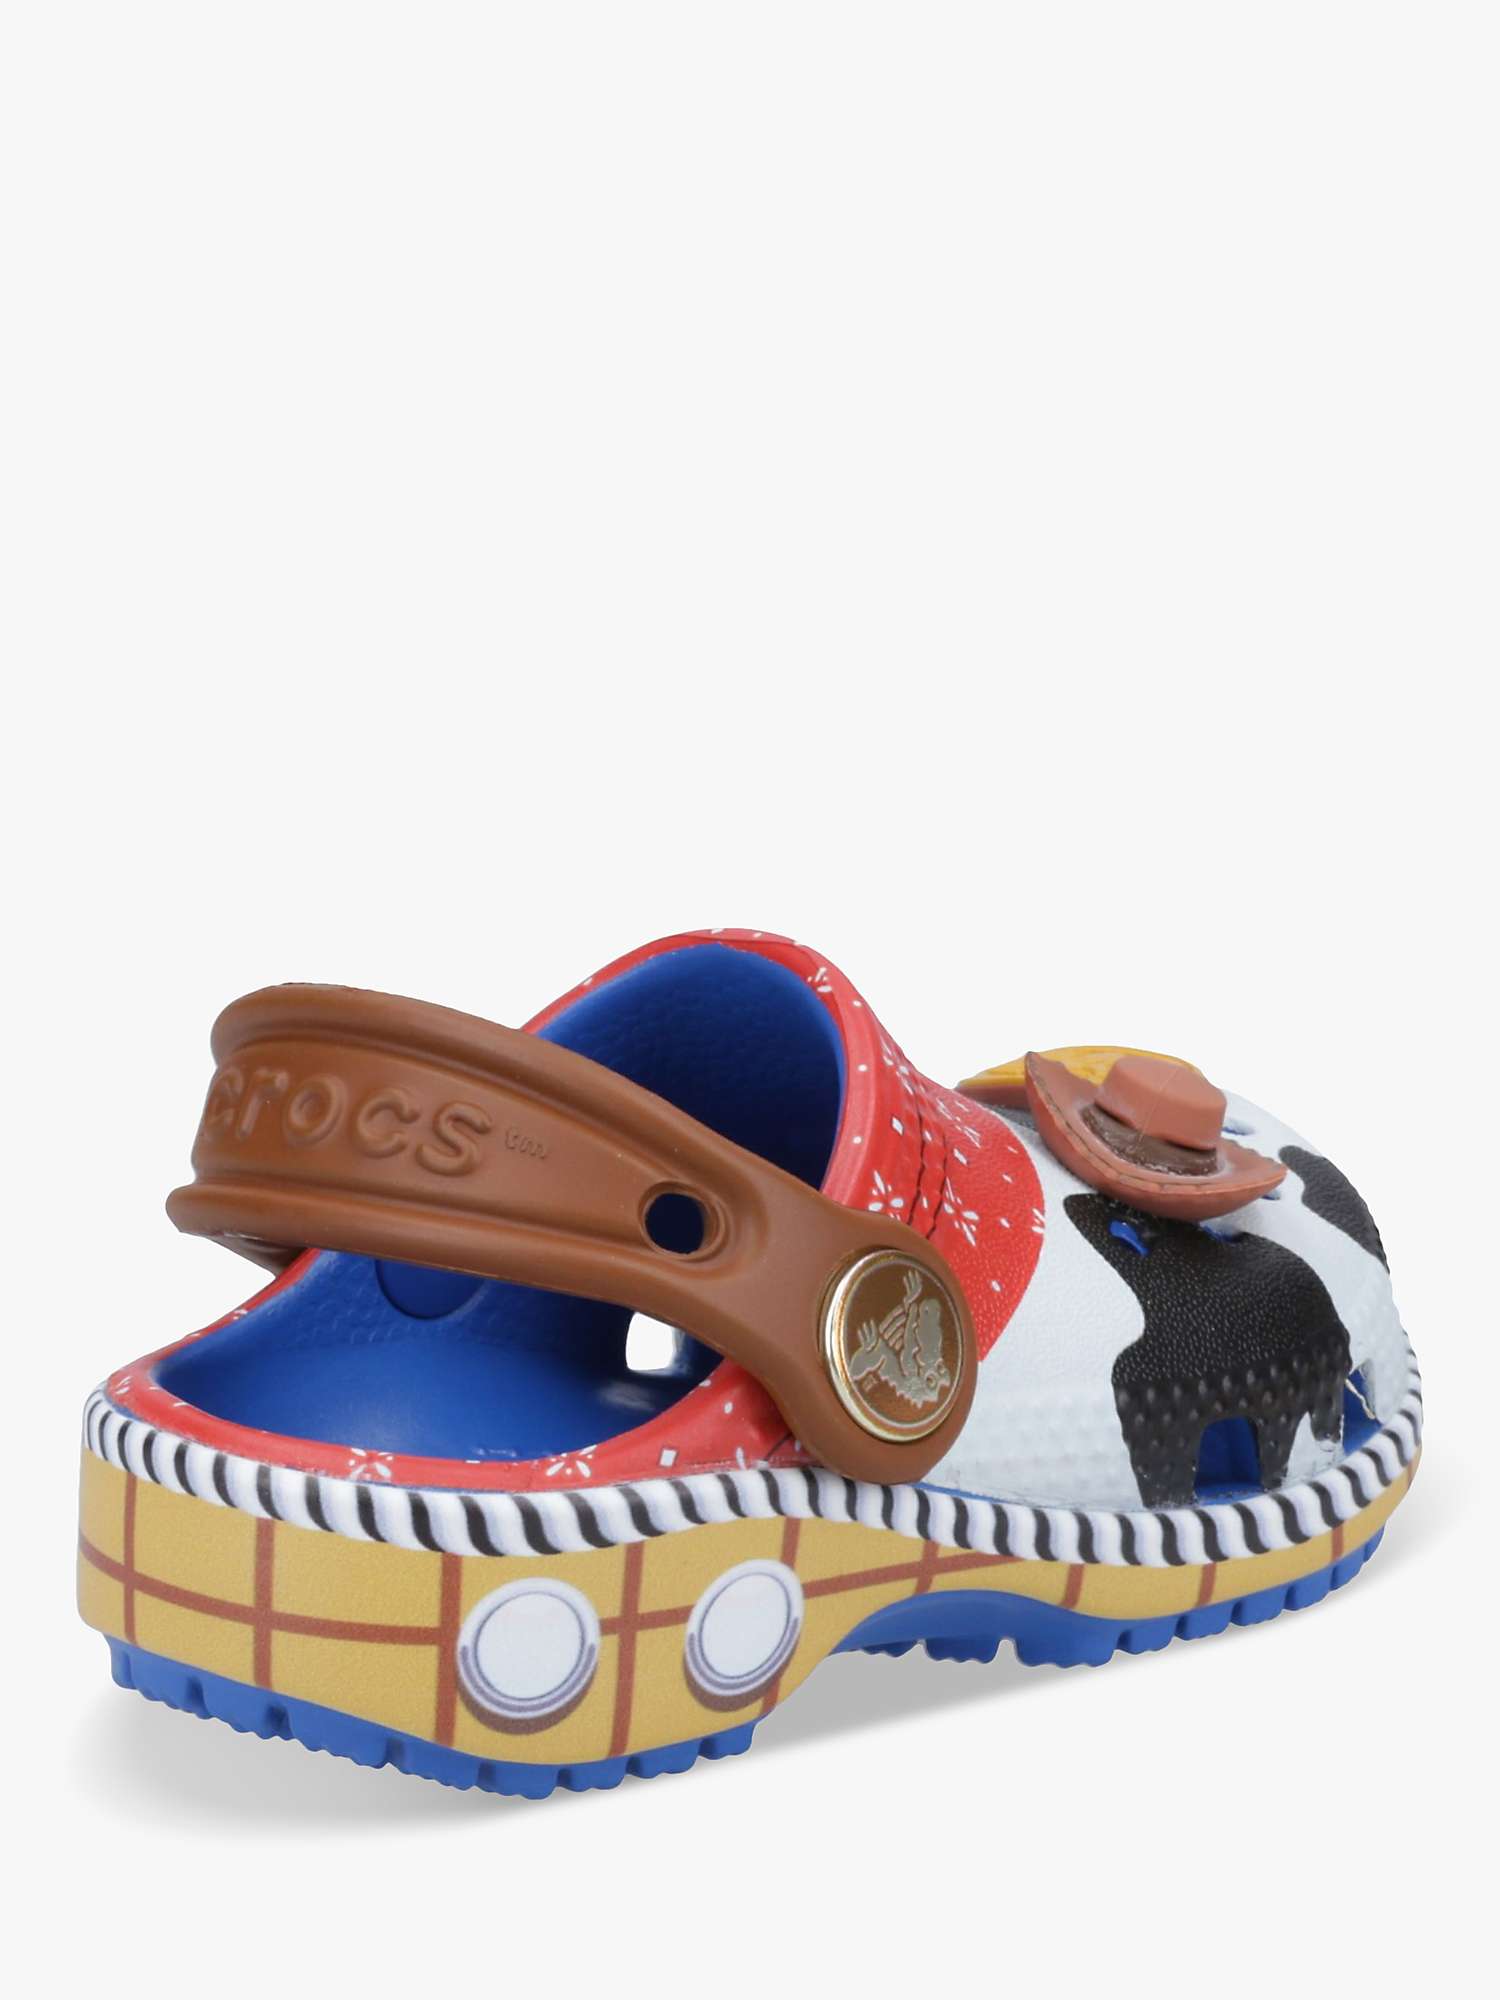 Buy Crocs Kids' Toy Story Woody Classic Clogs, Multi Online at johnlewis.com